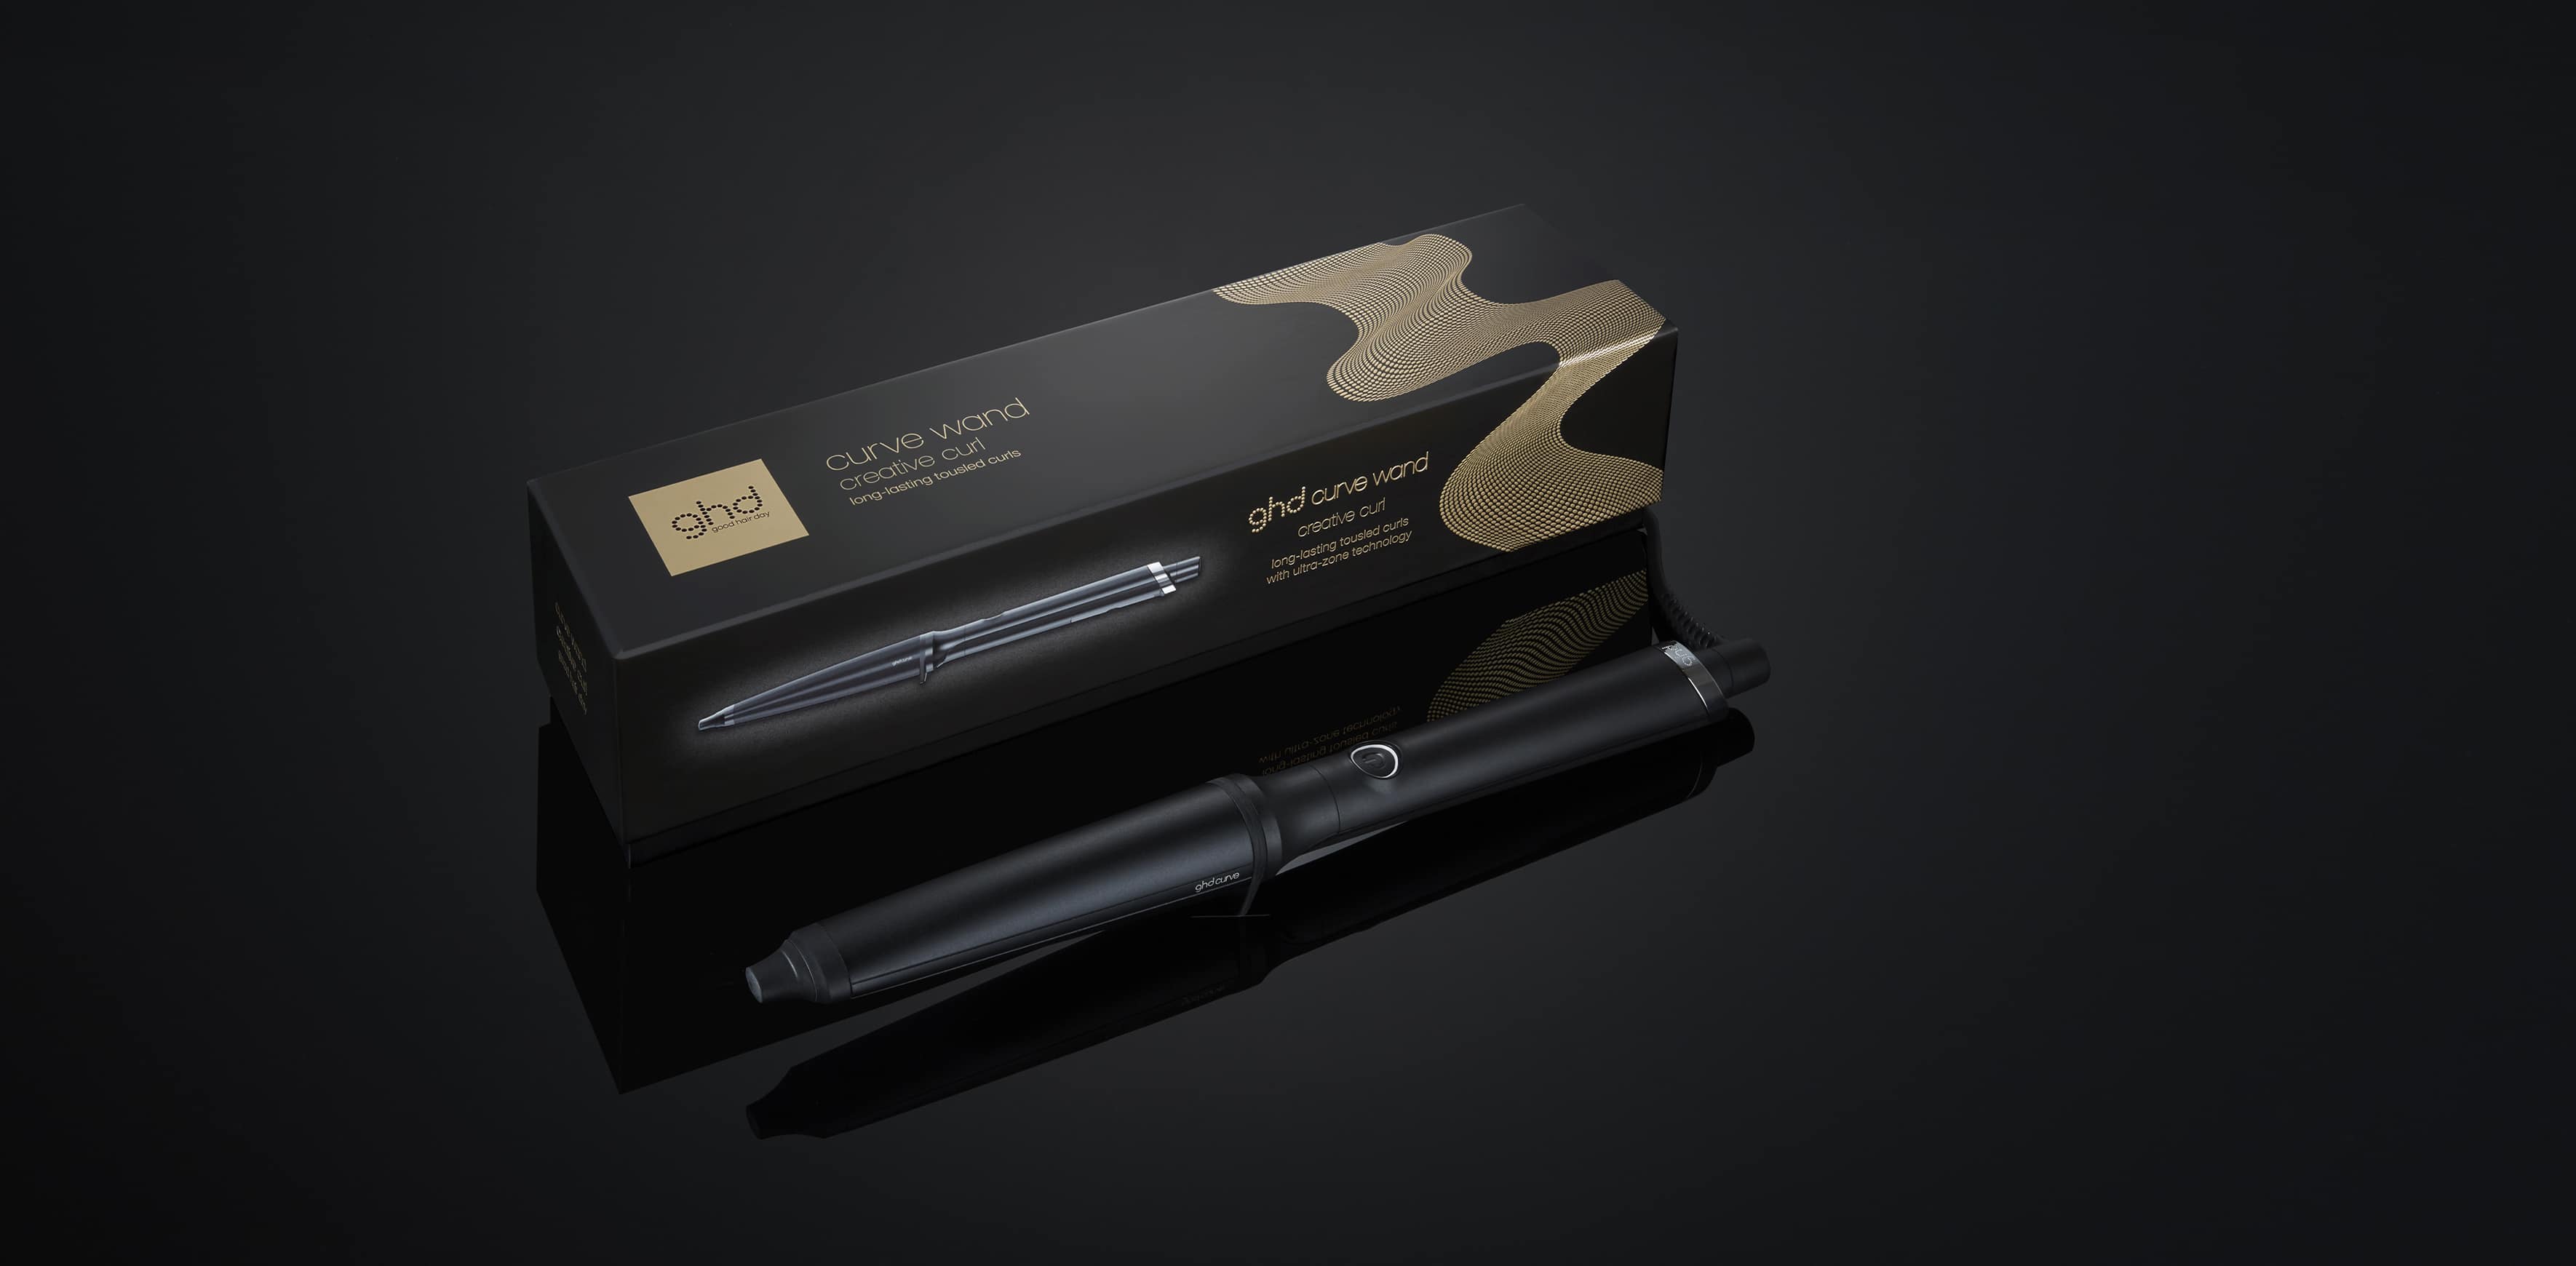 ghd Curling Iron